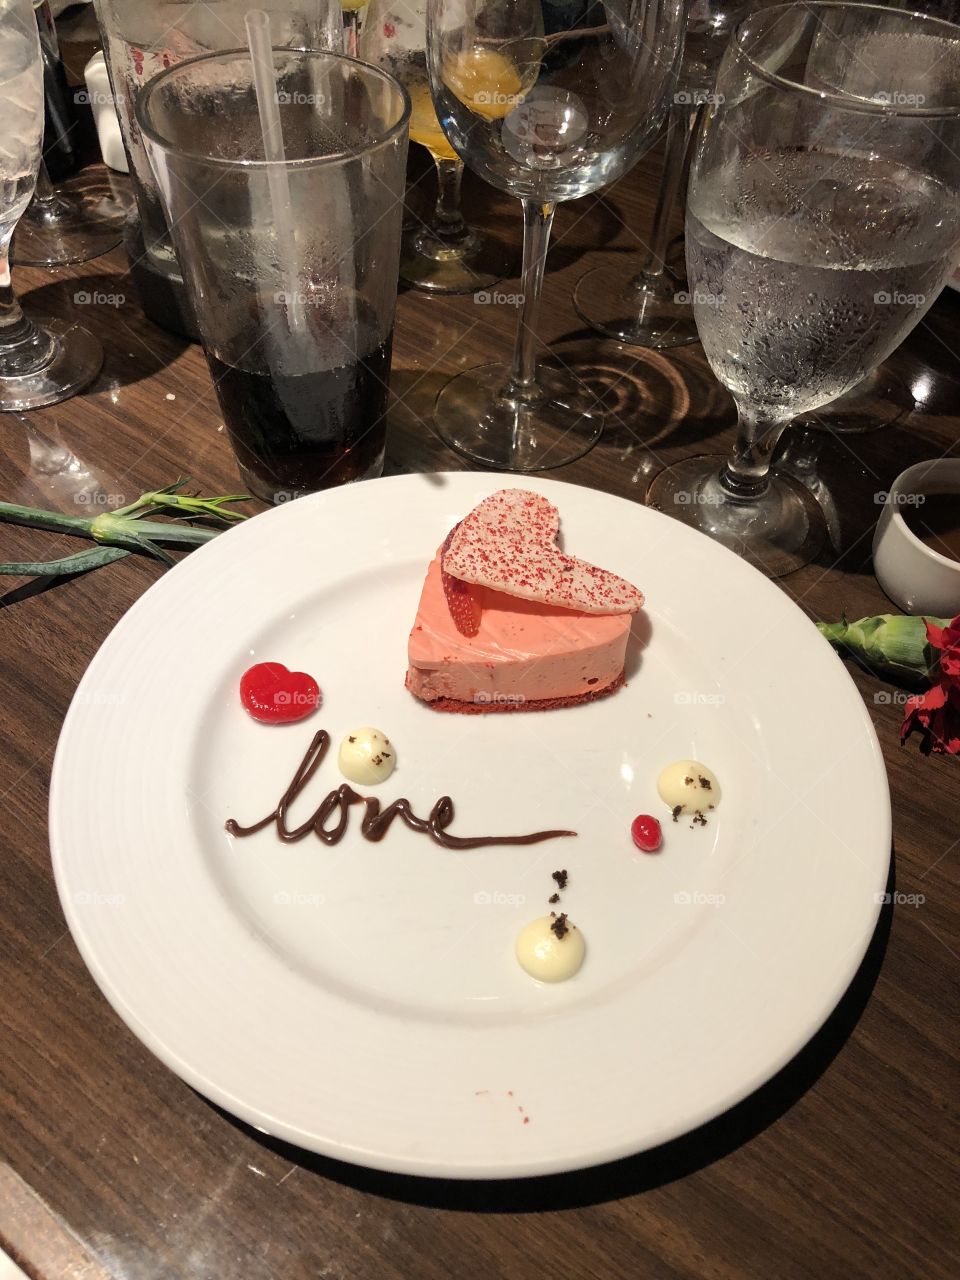 Valentine’s Day desert on Carnival Sunshine Cruise during vacation.